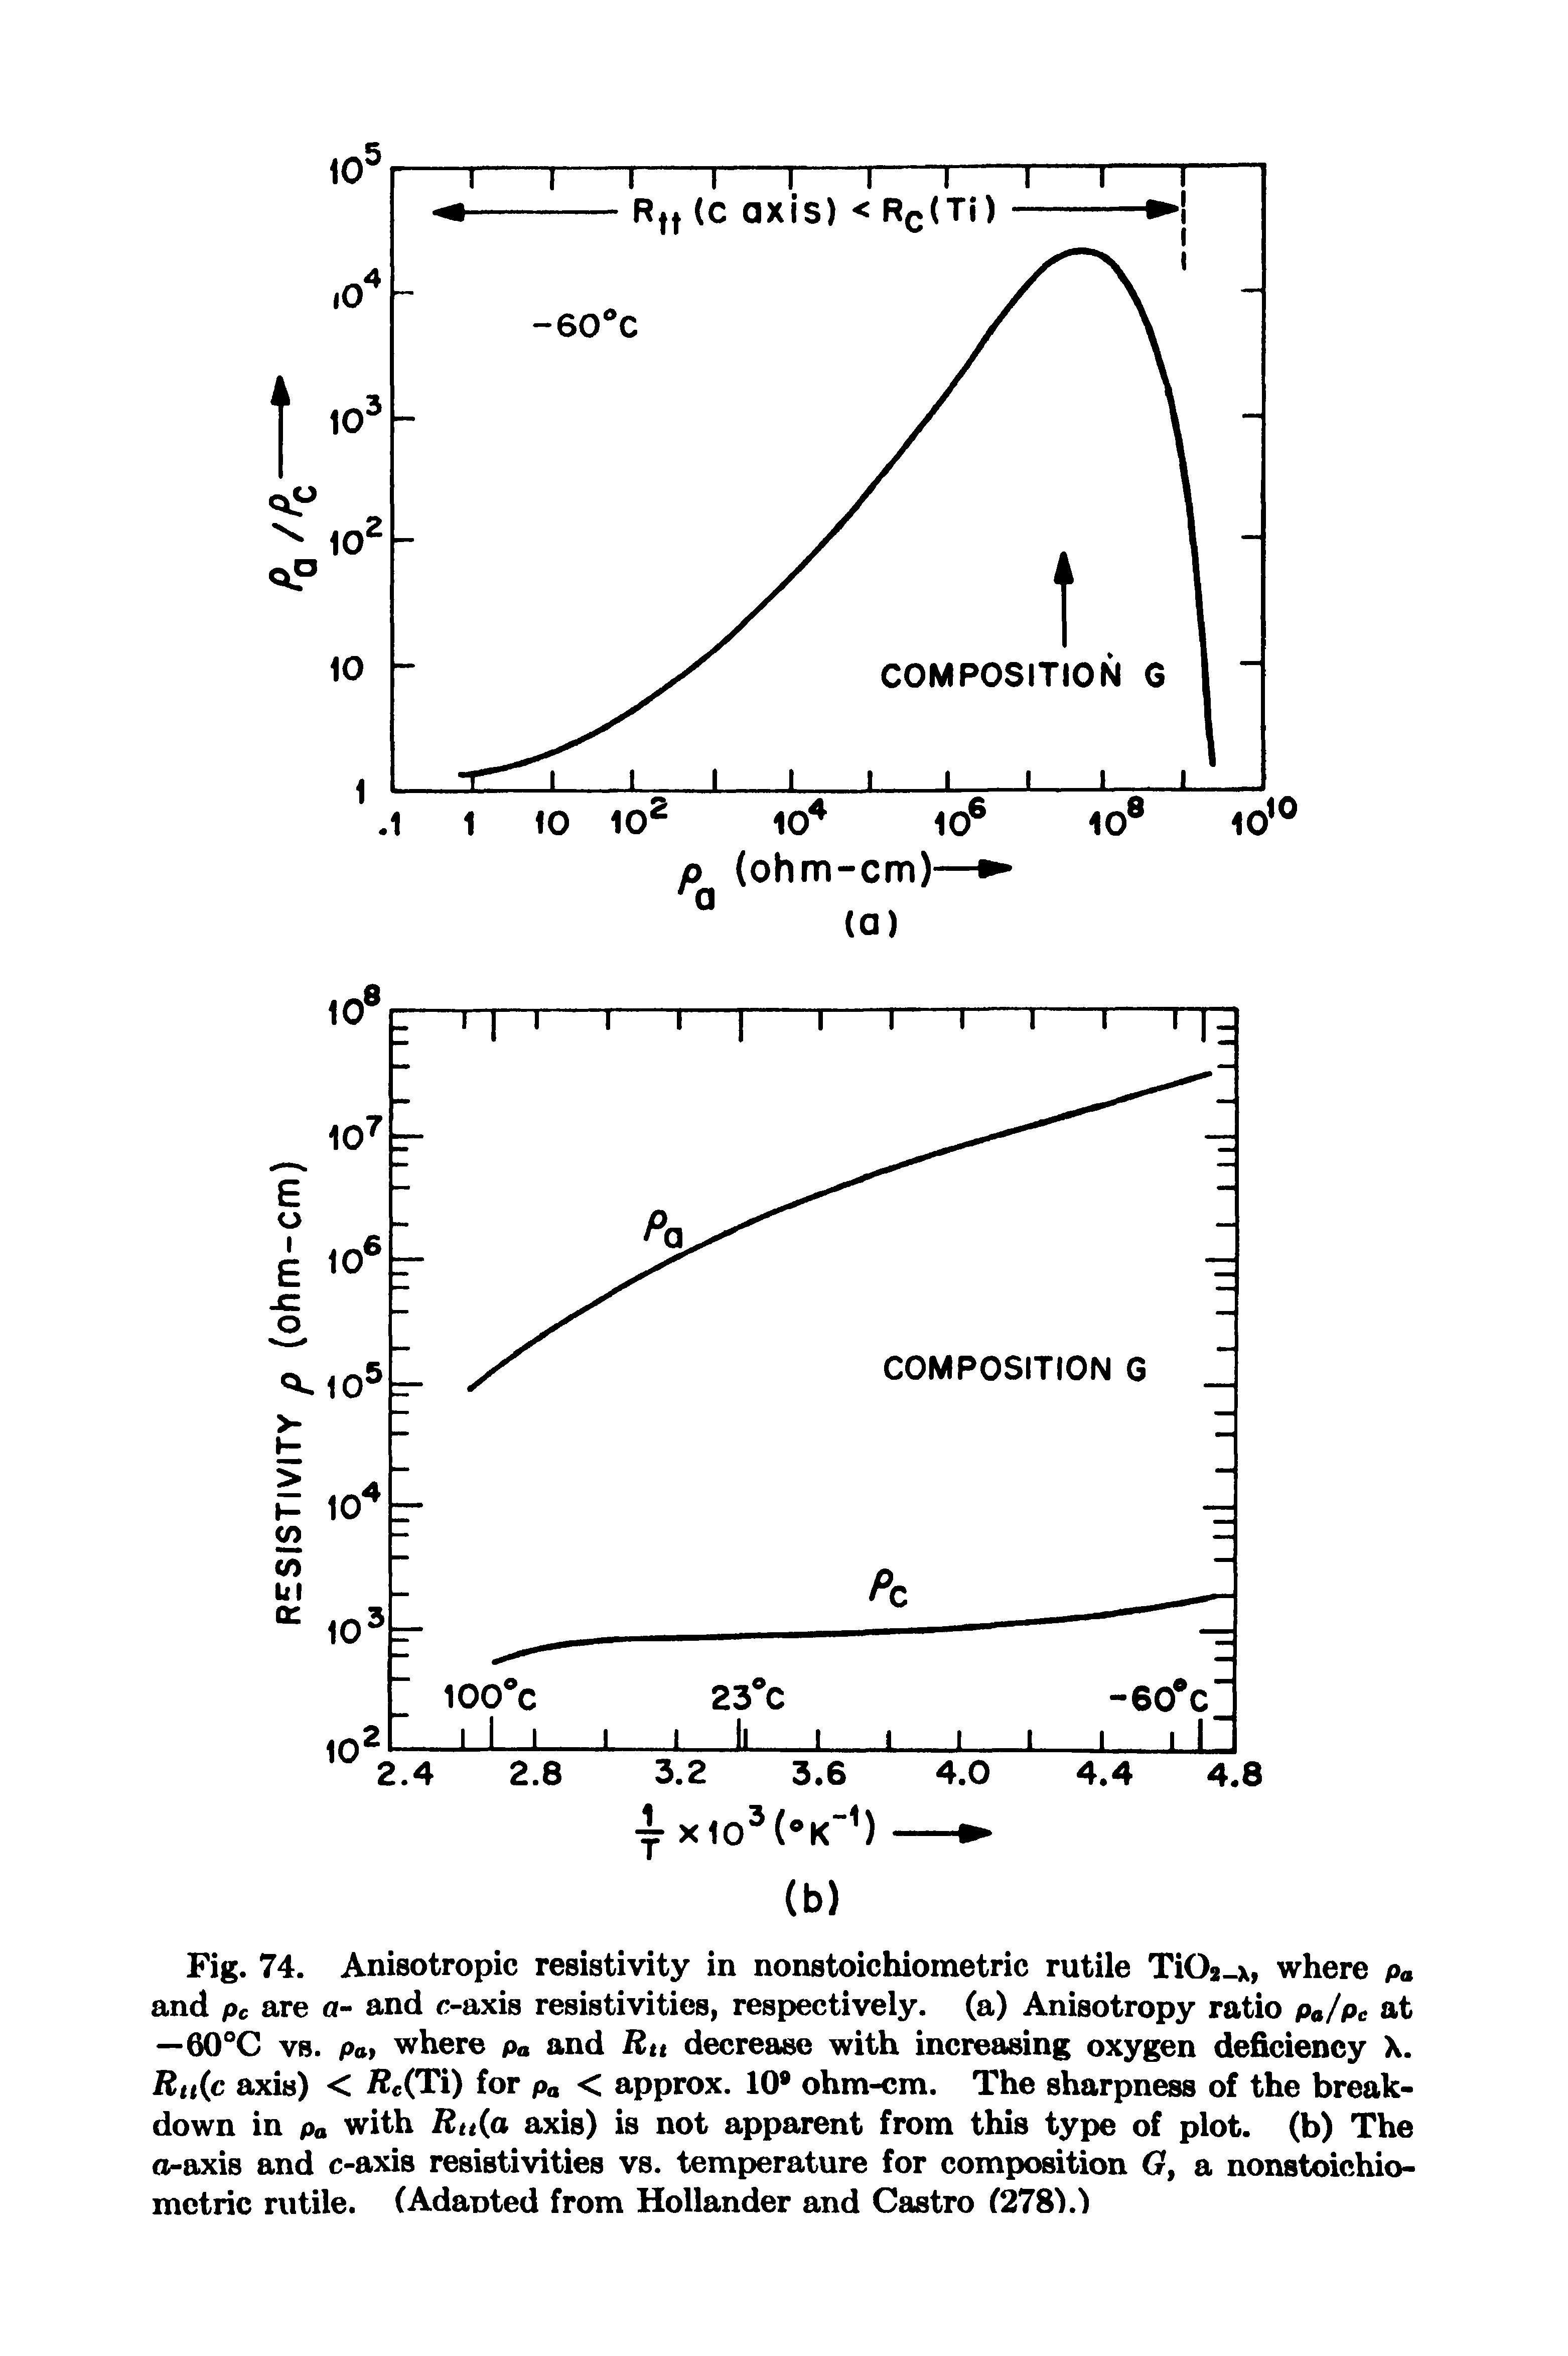 Fig. 74. Anisotropic resistivity in nonstoichiometric rutile Ti02 x, where p and pc are a- and c-axis resistivities, respectively, (a) Anisotropy ratio p /ptf at —60°C vs. pat where p and Rtt decrease with increasing oxygen deficiency X. Rtt(c axis) < Rc(Ti) for pa < approx. 10 ohm-cm. The sharpness of the breakdown in pa with Rtt(a axis) is not apparent from this type of plot, (b) The o-axis and c-axis resistivities vs. temperature for composition G, a nonstoichiometric rutile. (Adaoted from Hollander and Castro (278).)...